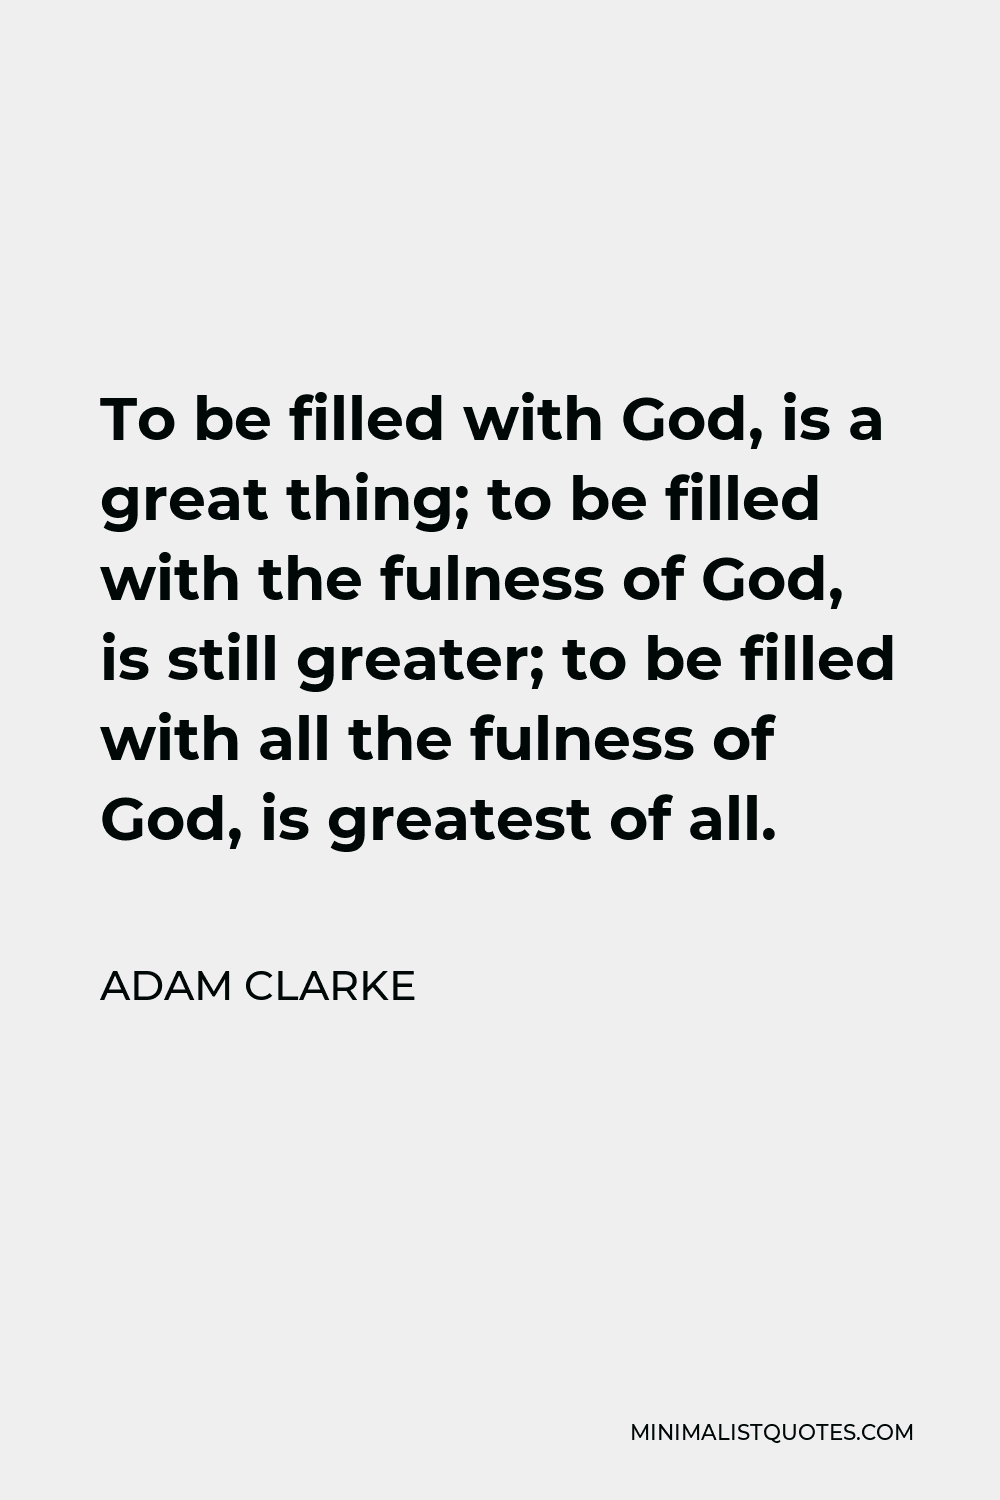 Adam Clarke Quote - To be filled with God, is a great thing; to be filled with the fulness of God, is still greater; to be filled with all the fulness of God, is greatest of all.